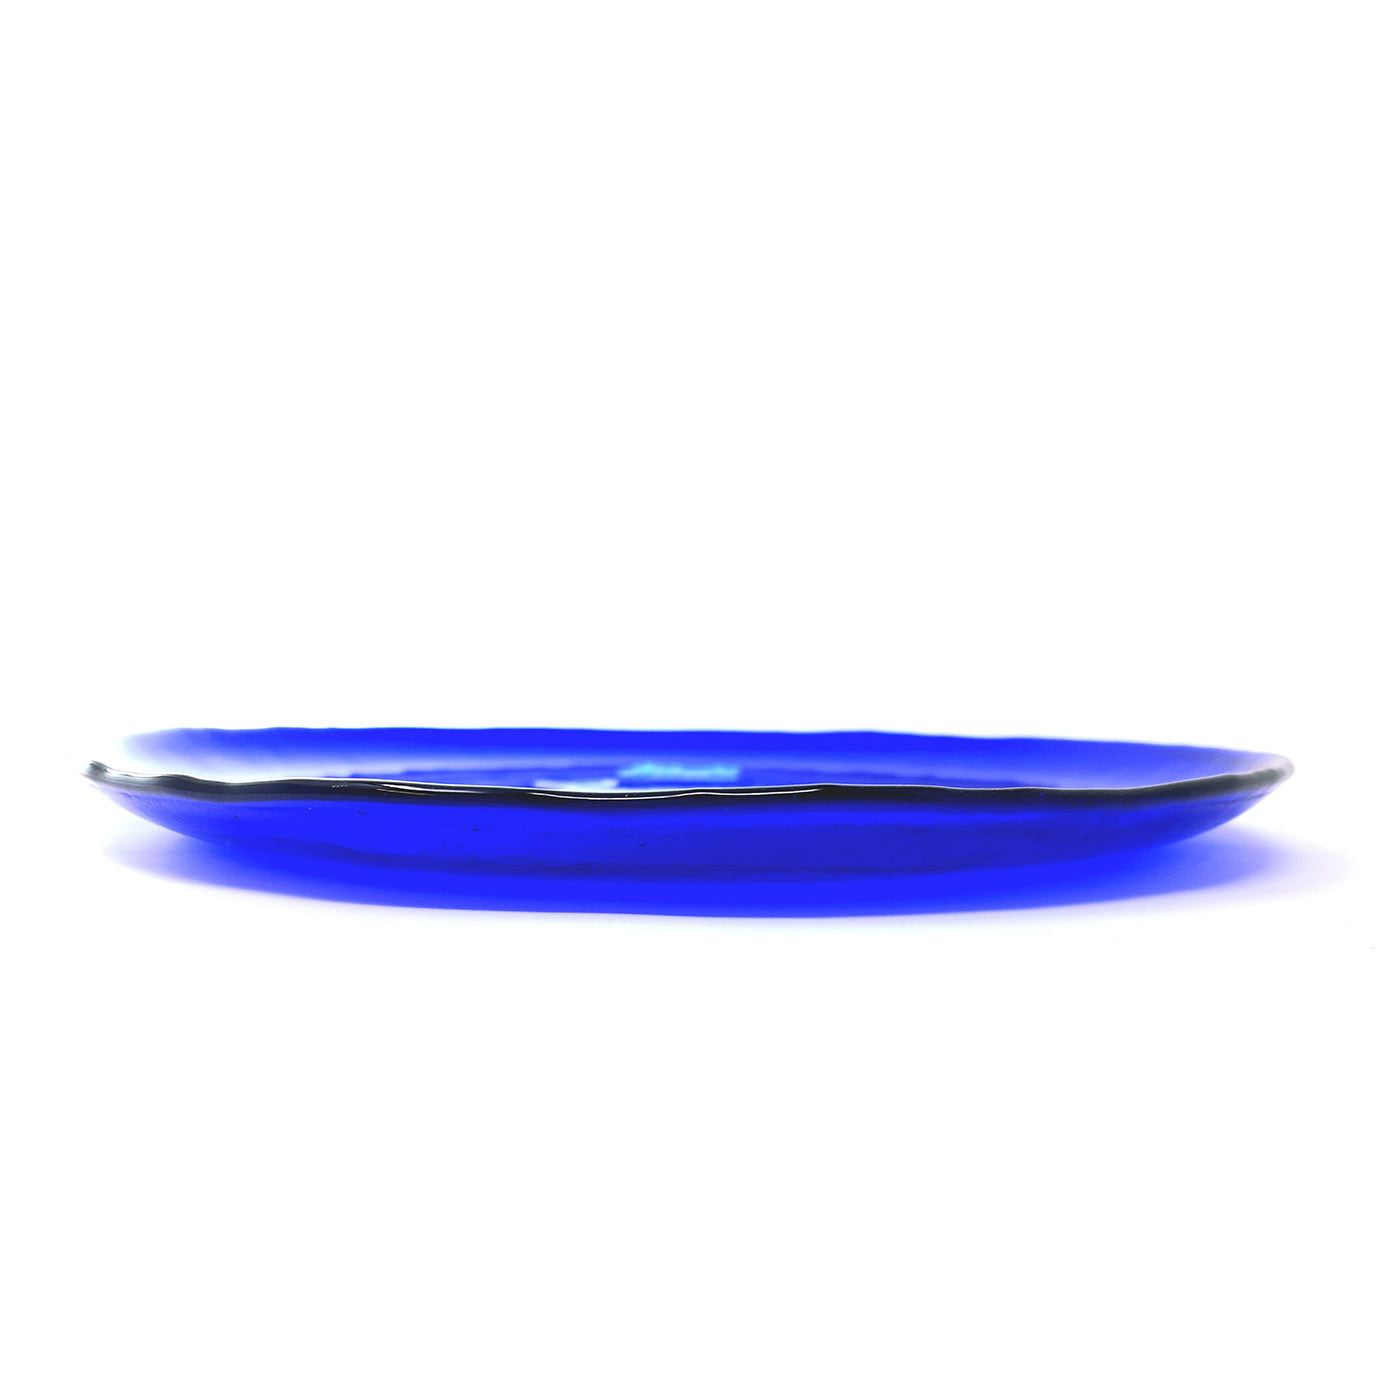 Whale Plate in  Cobalt Blue Glass  - Alternative view 1